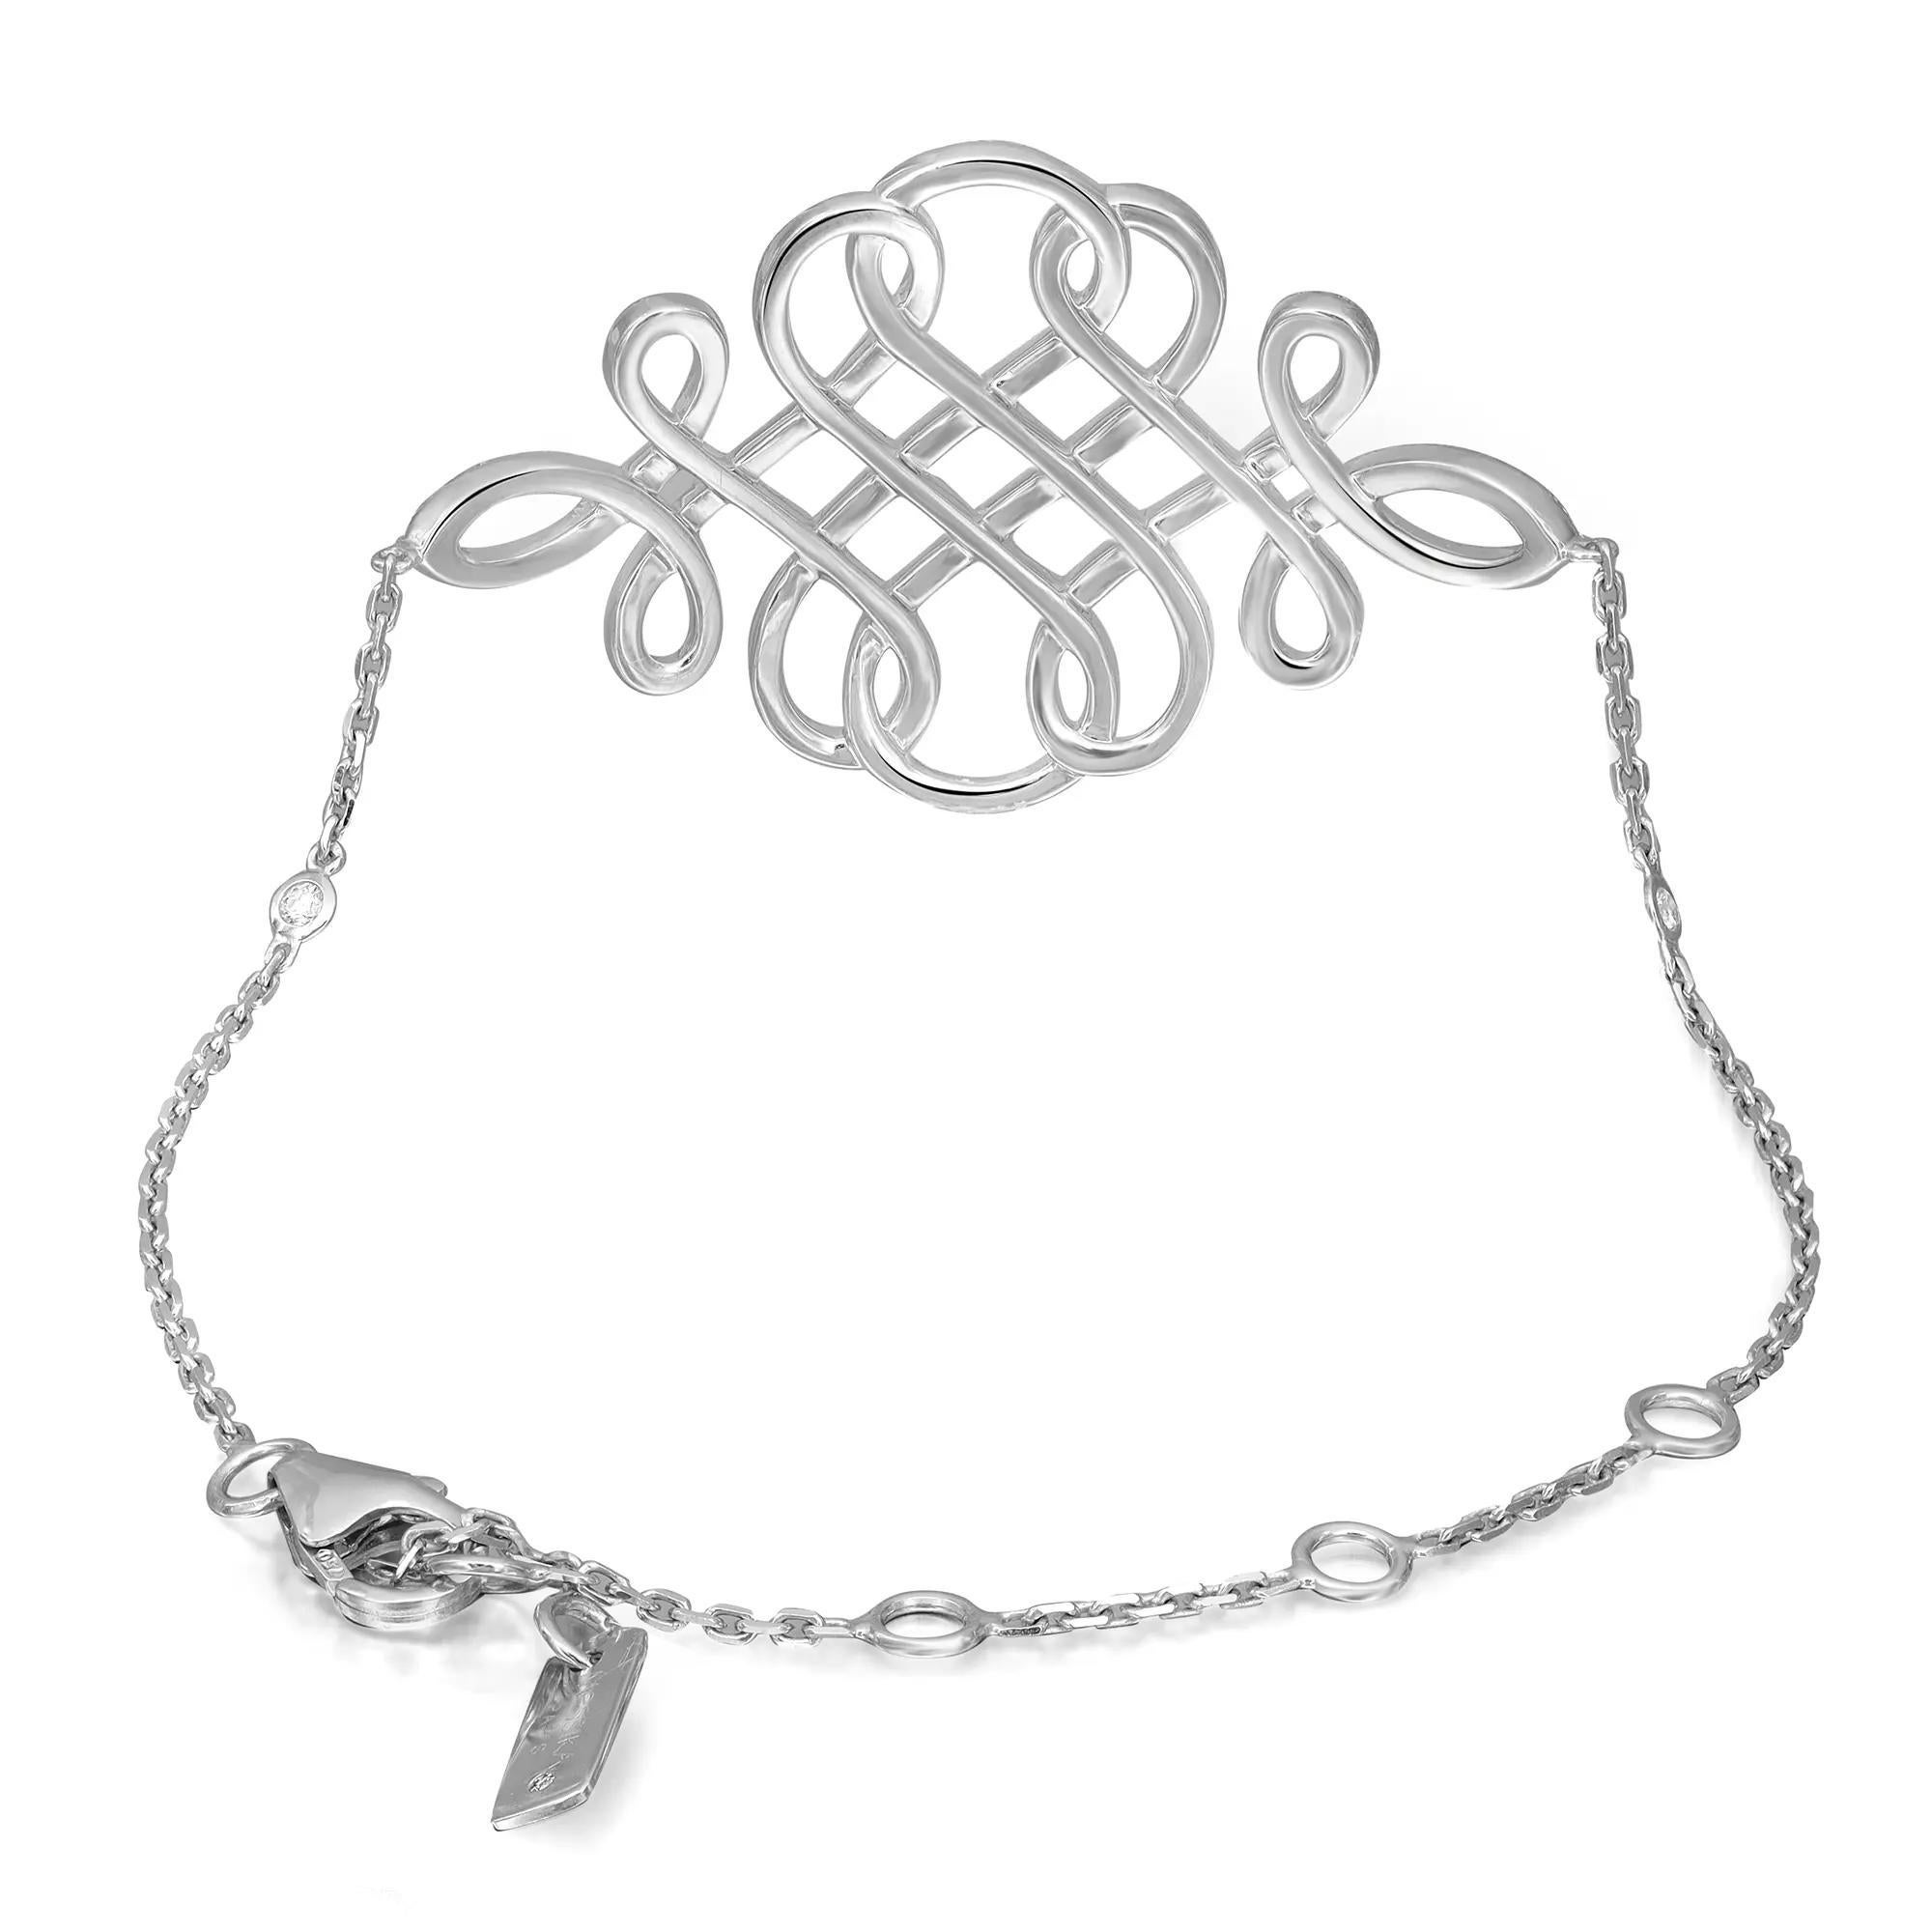 Get the perfect dazzling look with this stunning chain bracelet from the Messika Promess collection. Crafted in high polish 18K white gold. It's stackable and easy to mix and match. This bracelet features a spiral motif studded with pave set round